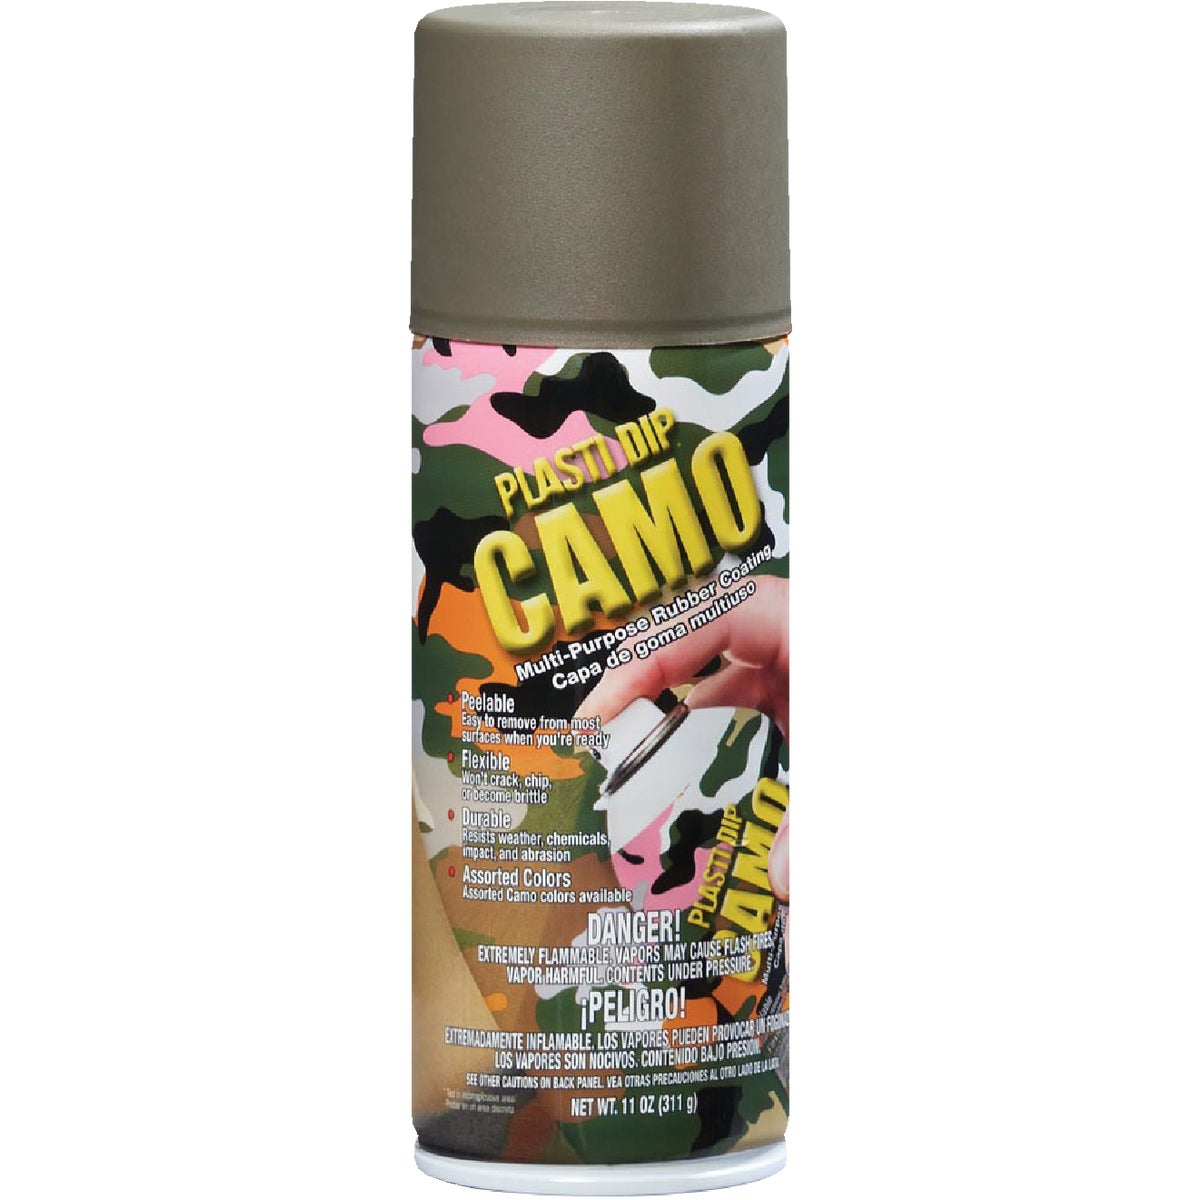 Item 771055, Plasti Dip Camo is a special collection of Plasti Dip colors designed to 